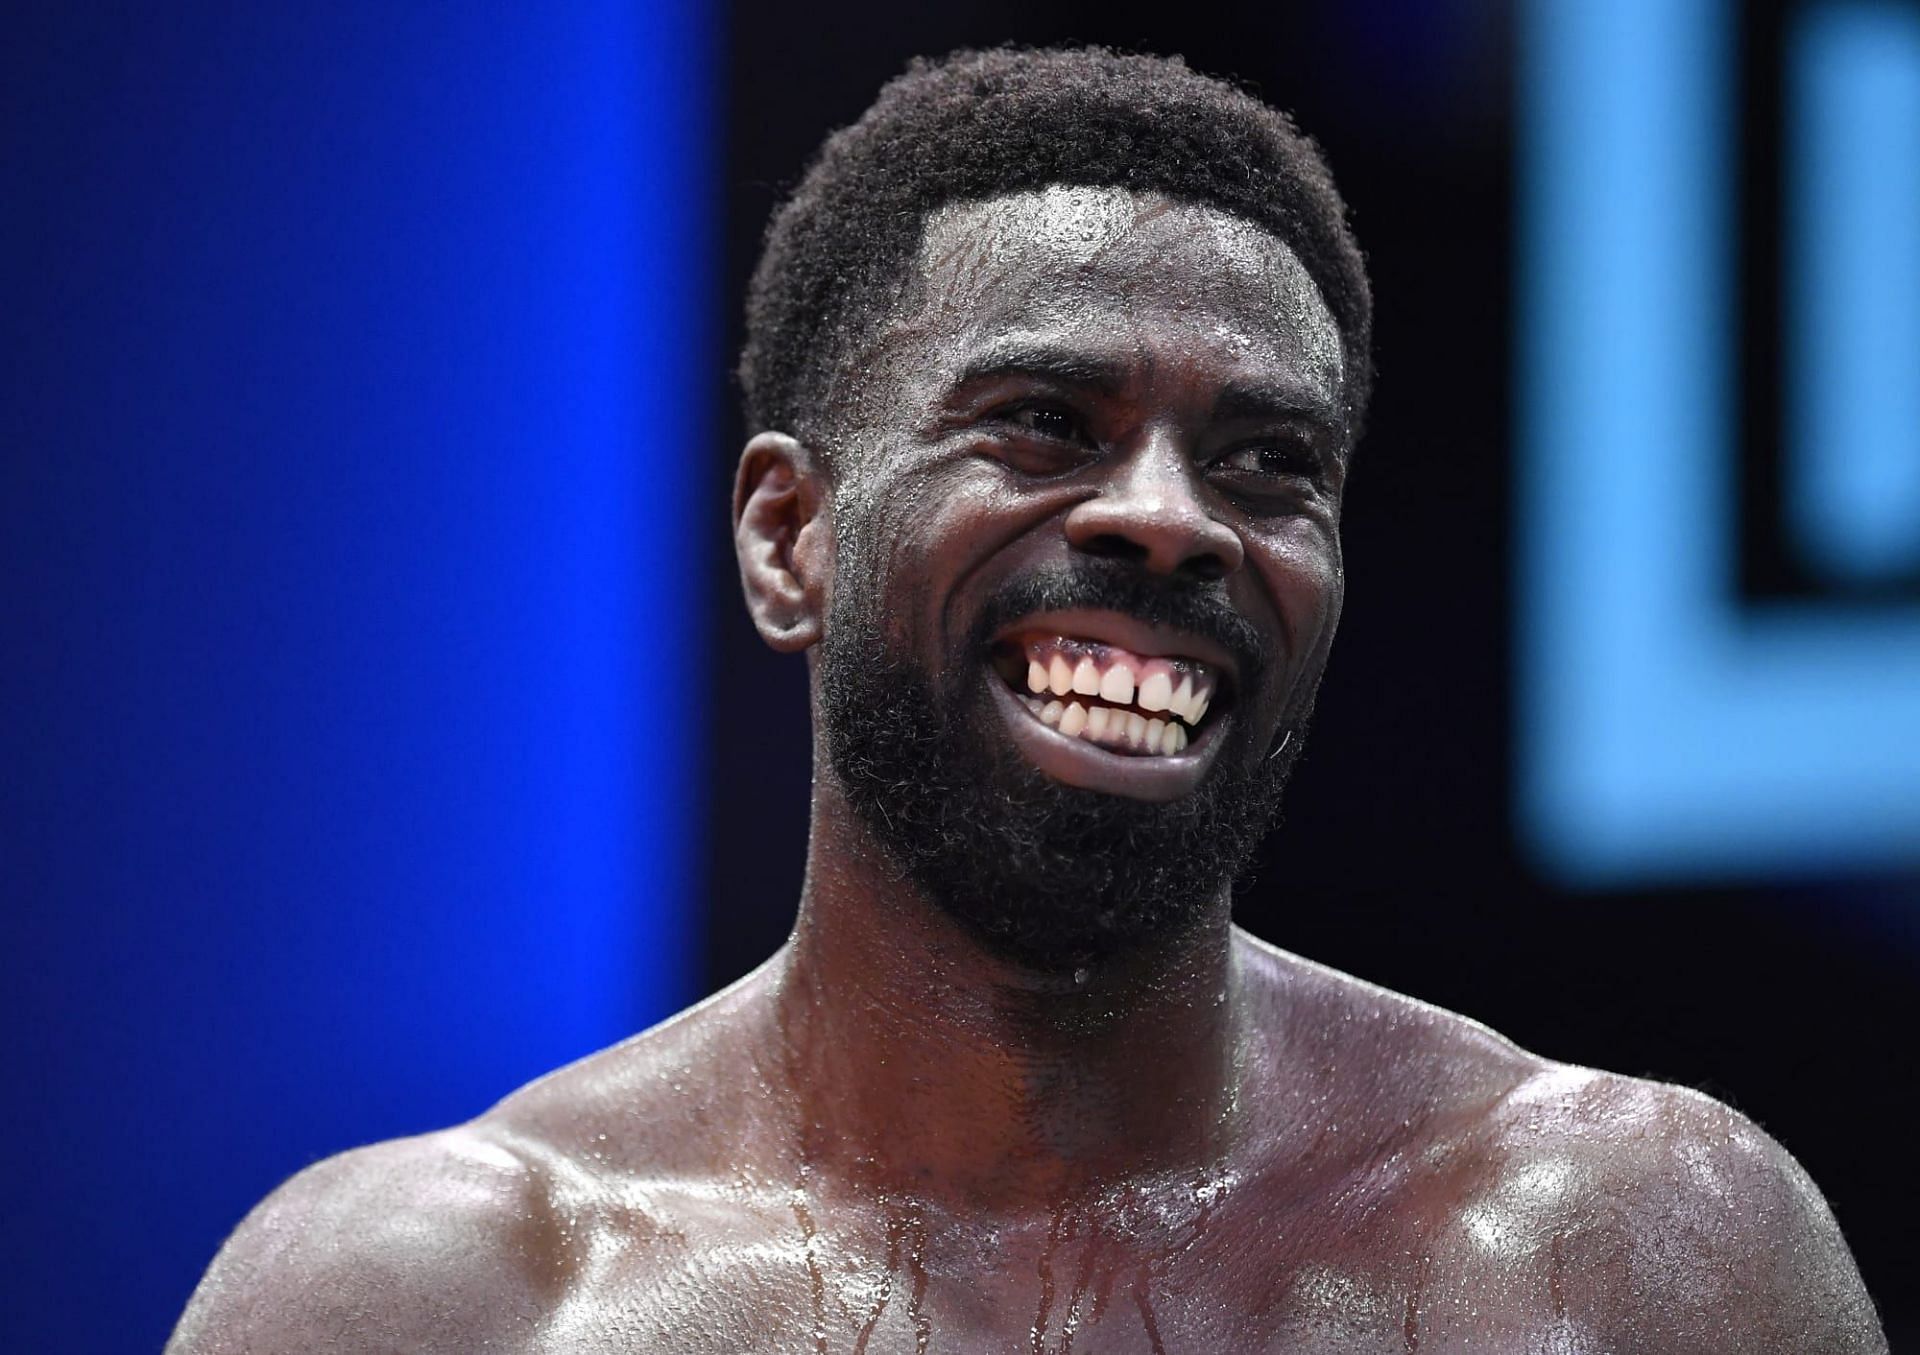 Chidi Njokuani could go onto UFC stardom after his wild debut knockout